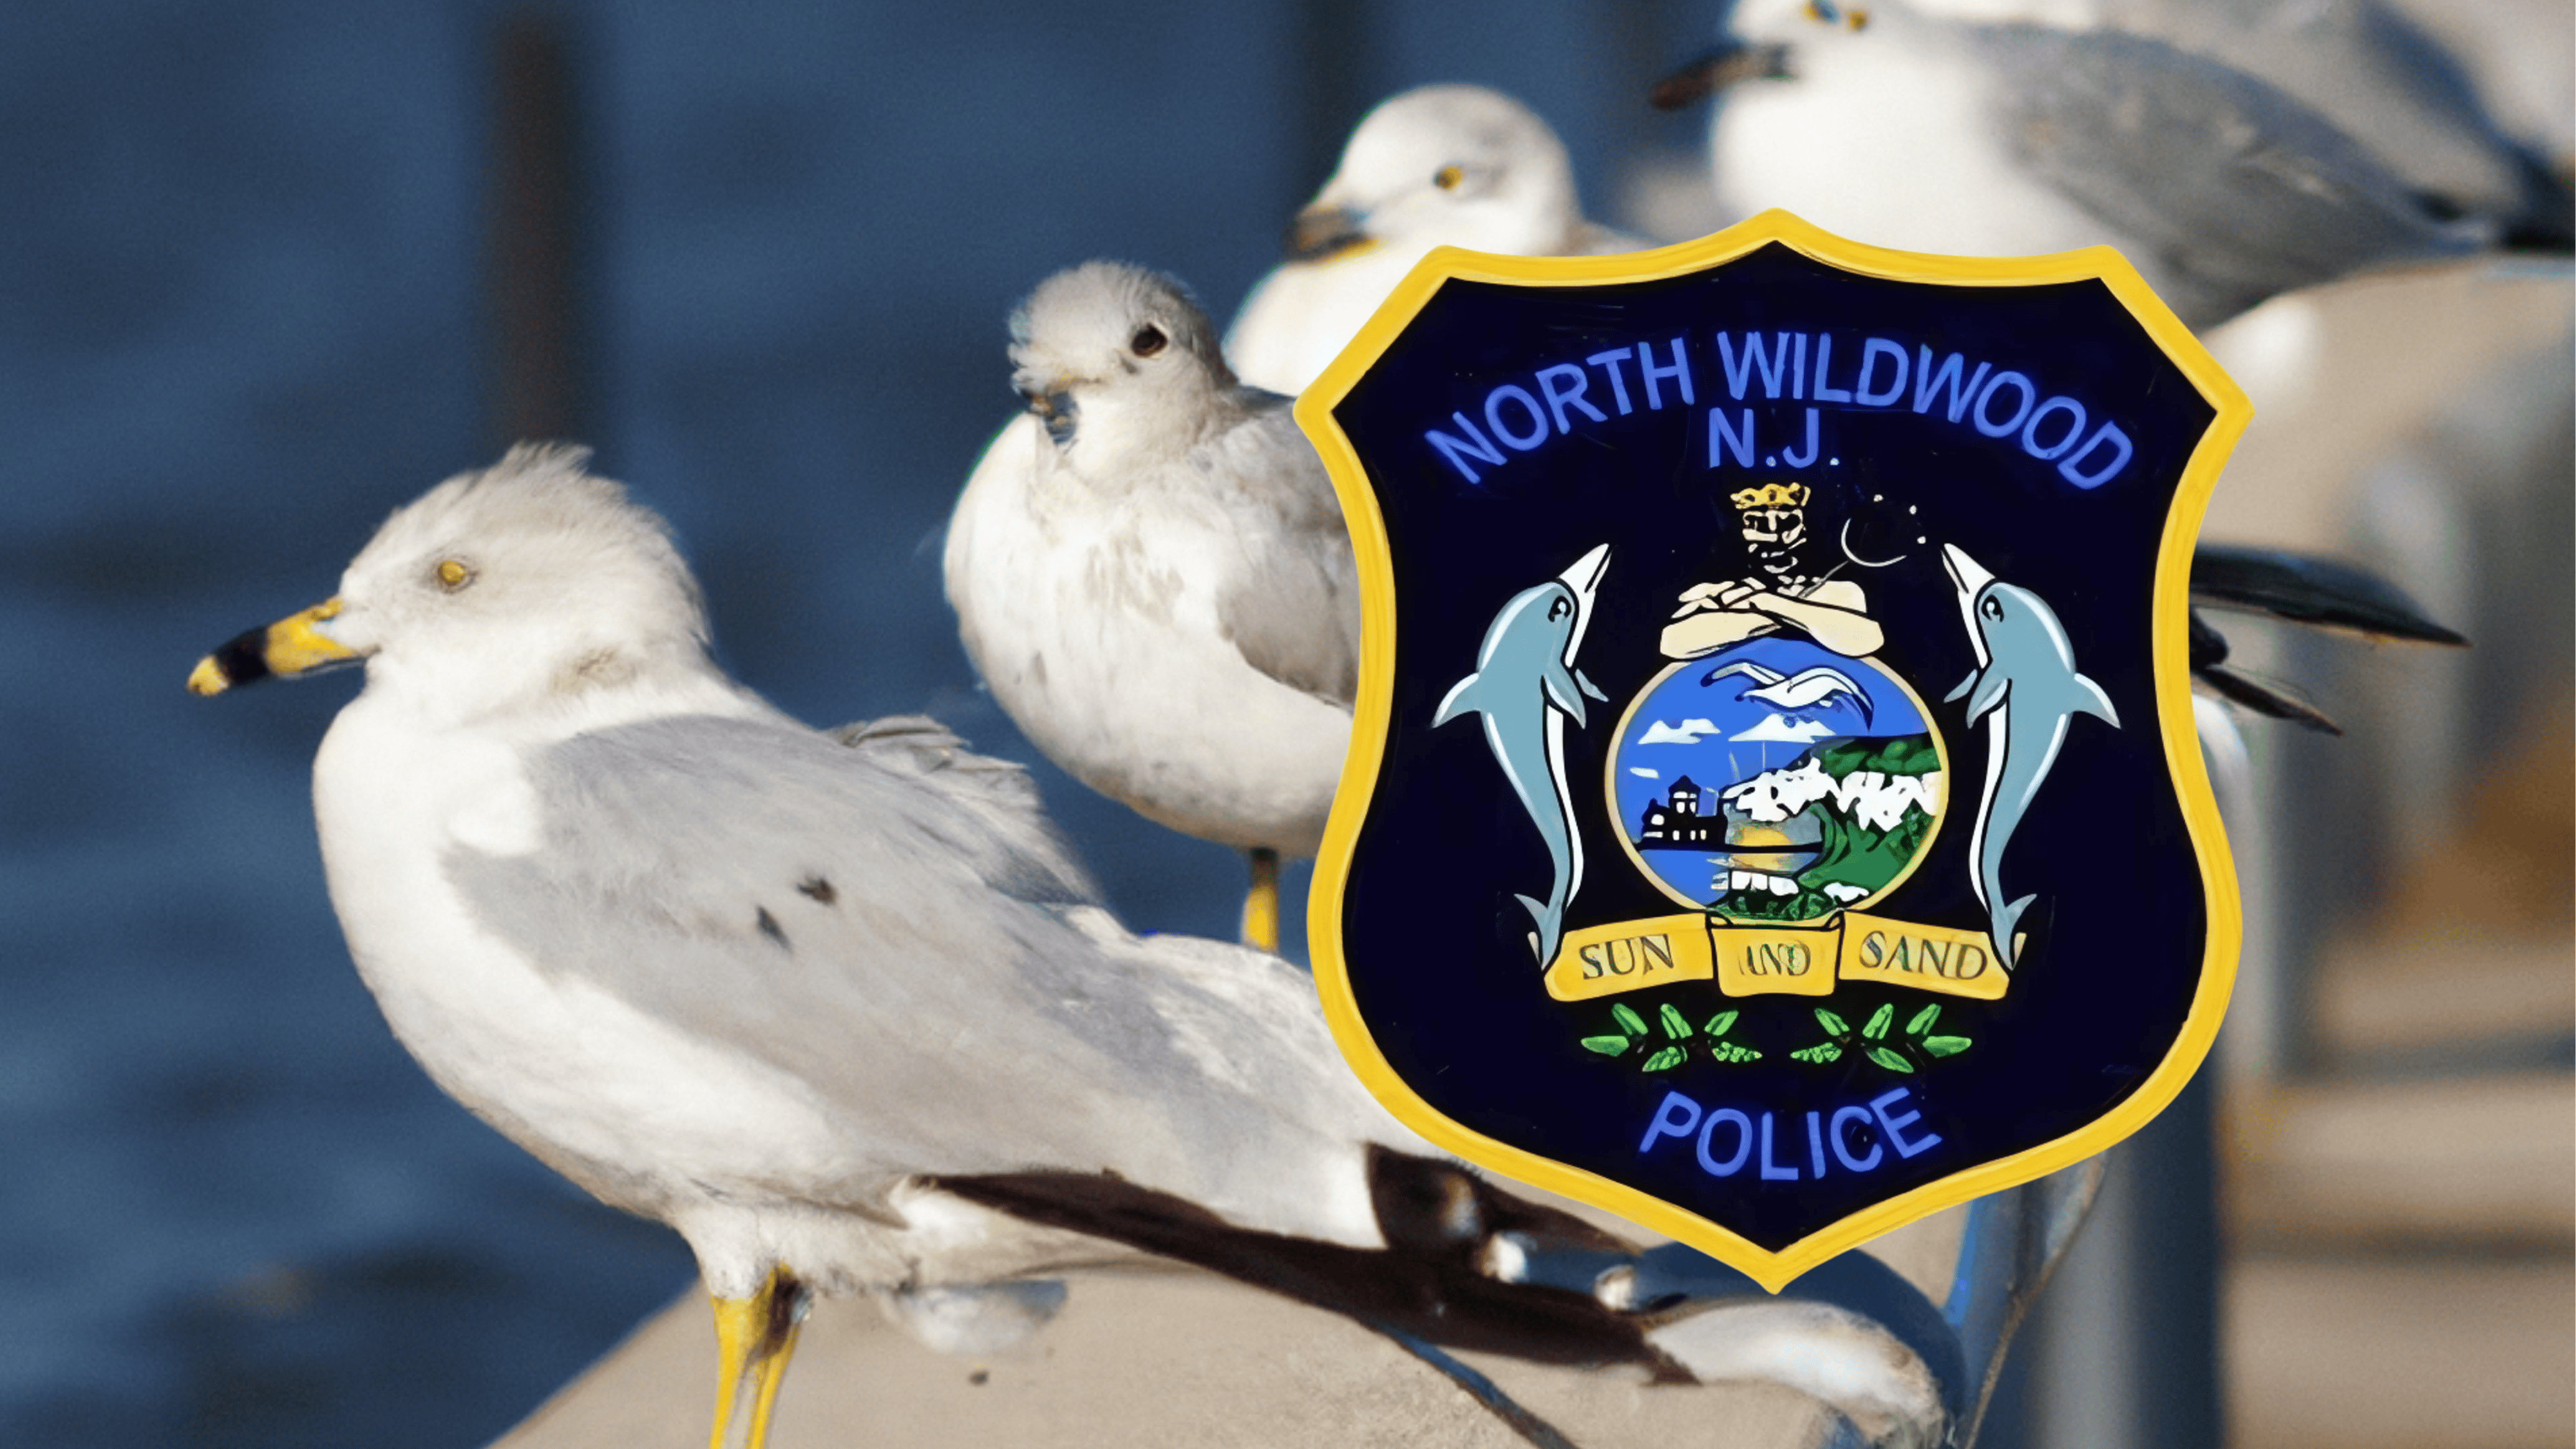 Man Accused of Decapitating Seagull on North Wildwood Beach